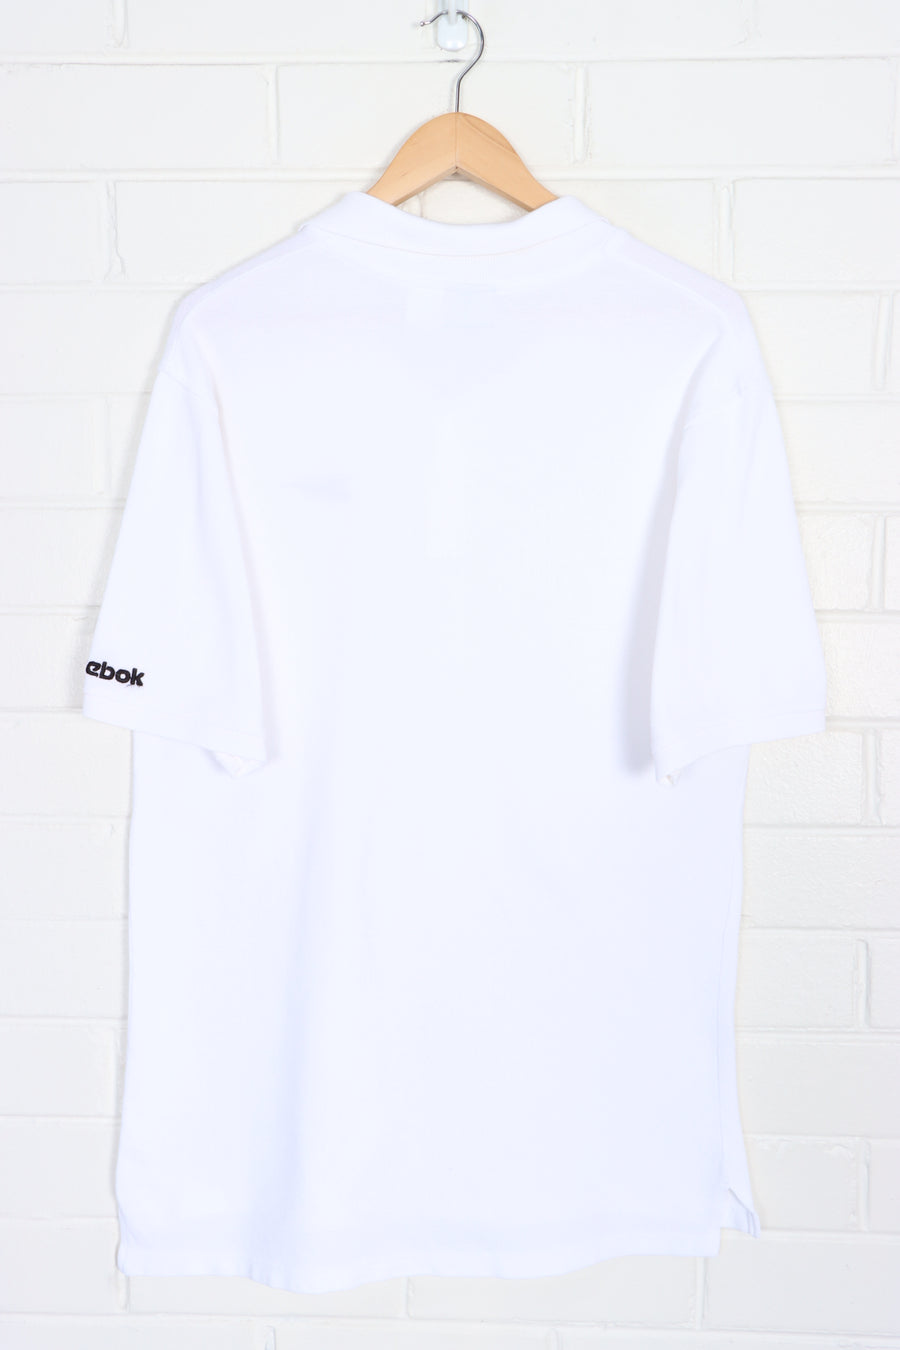 REEBOK Knit Texture Embroidered White Tall Polo Shirt (M)